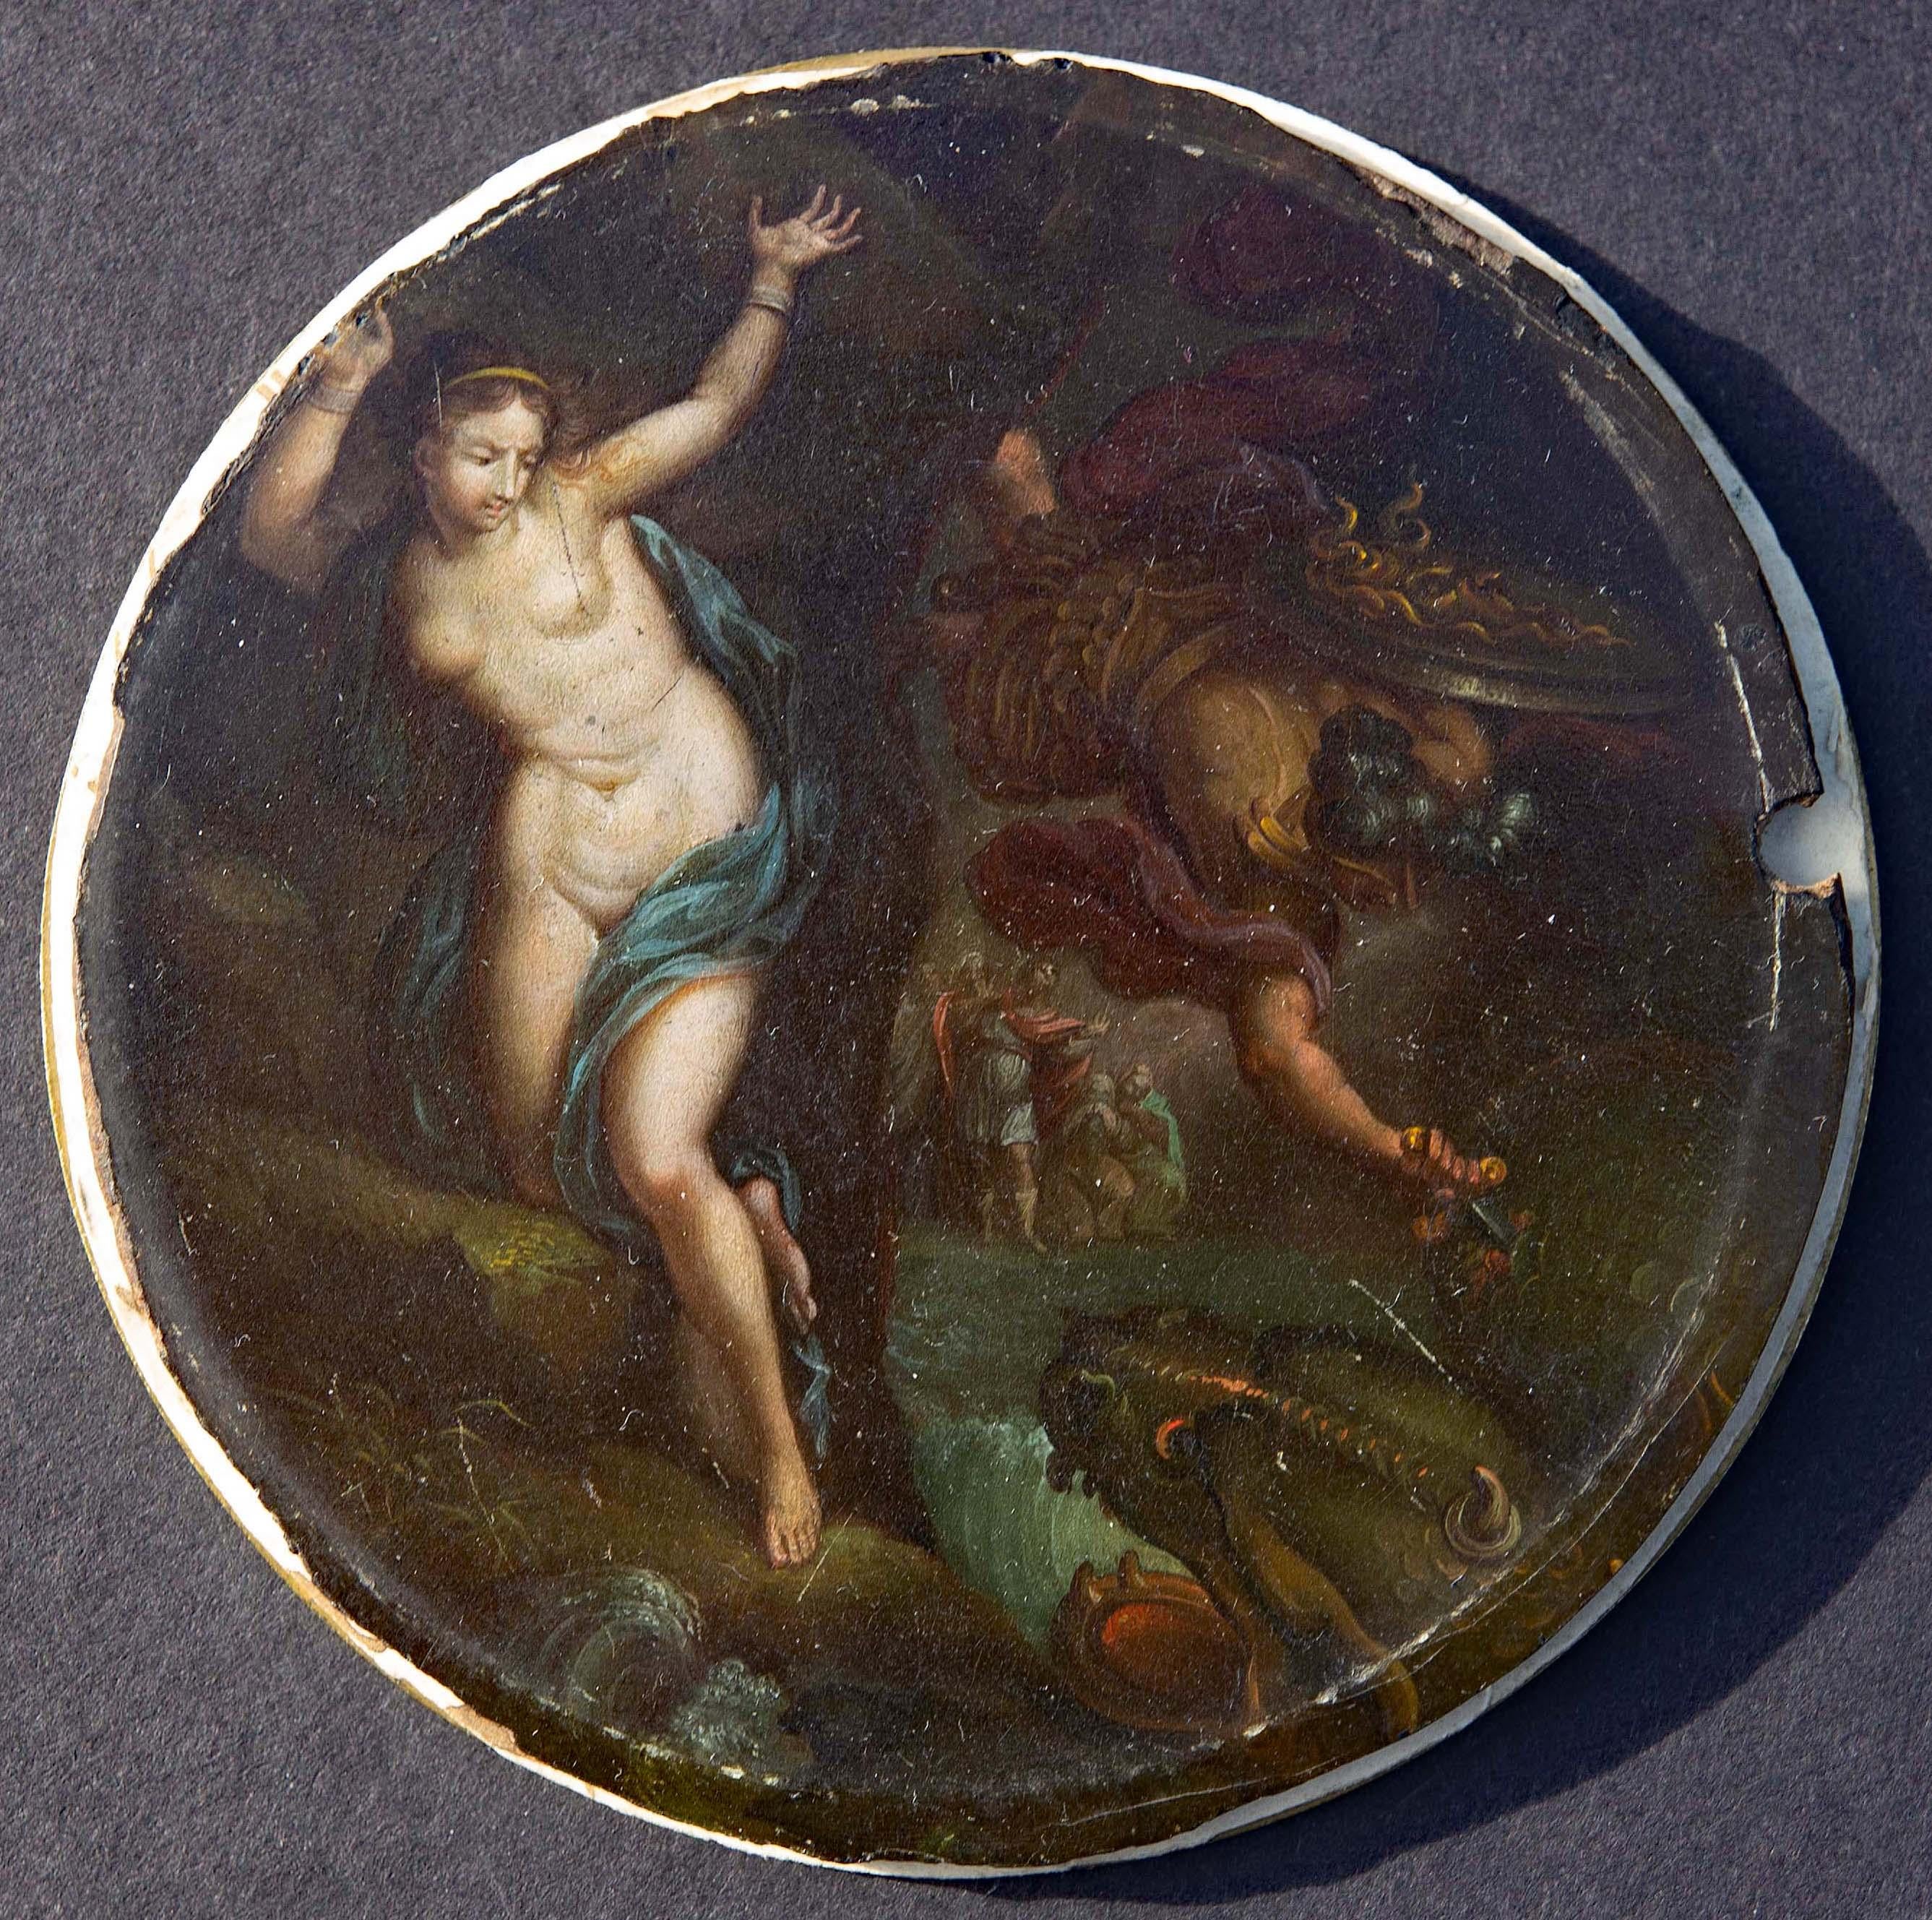 Antique miniature oil painting of Perseus and Andromeda on papier mache. Extraordinary detail. Titled and artist monogram on reverse. Probably German. Early 19th century in a brass frame. Interesting paper backing.










# russian french old